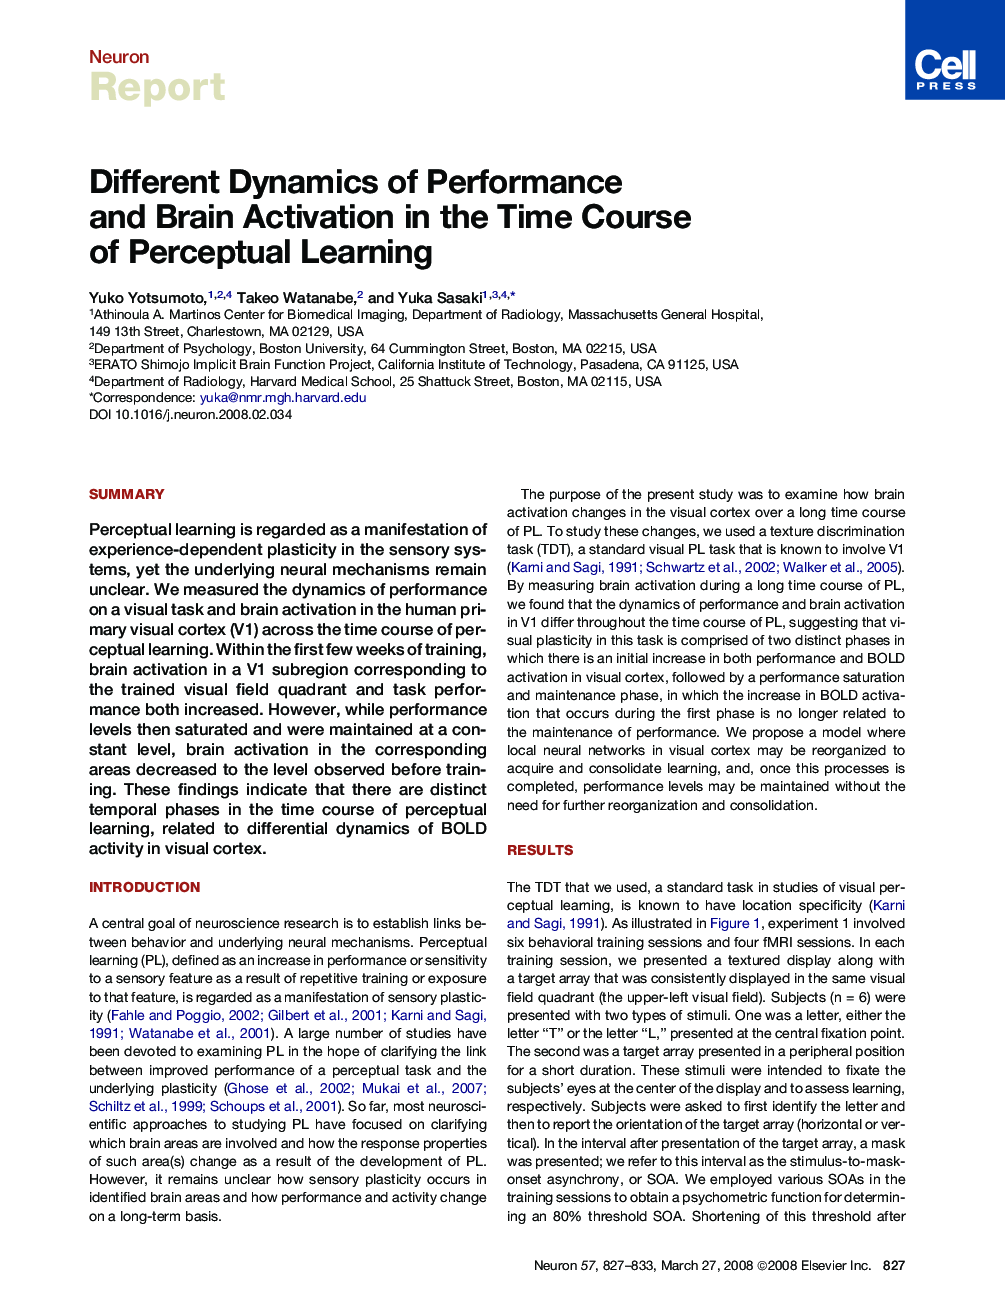 Different Dynamics of Performance and Brain Activation in the Time Course of Perceptual Learning